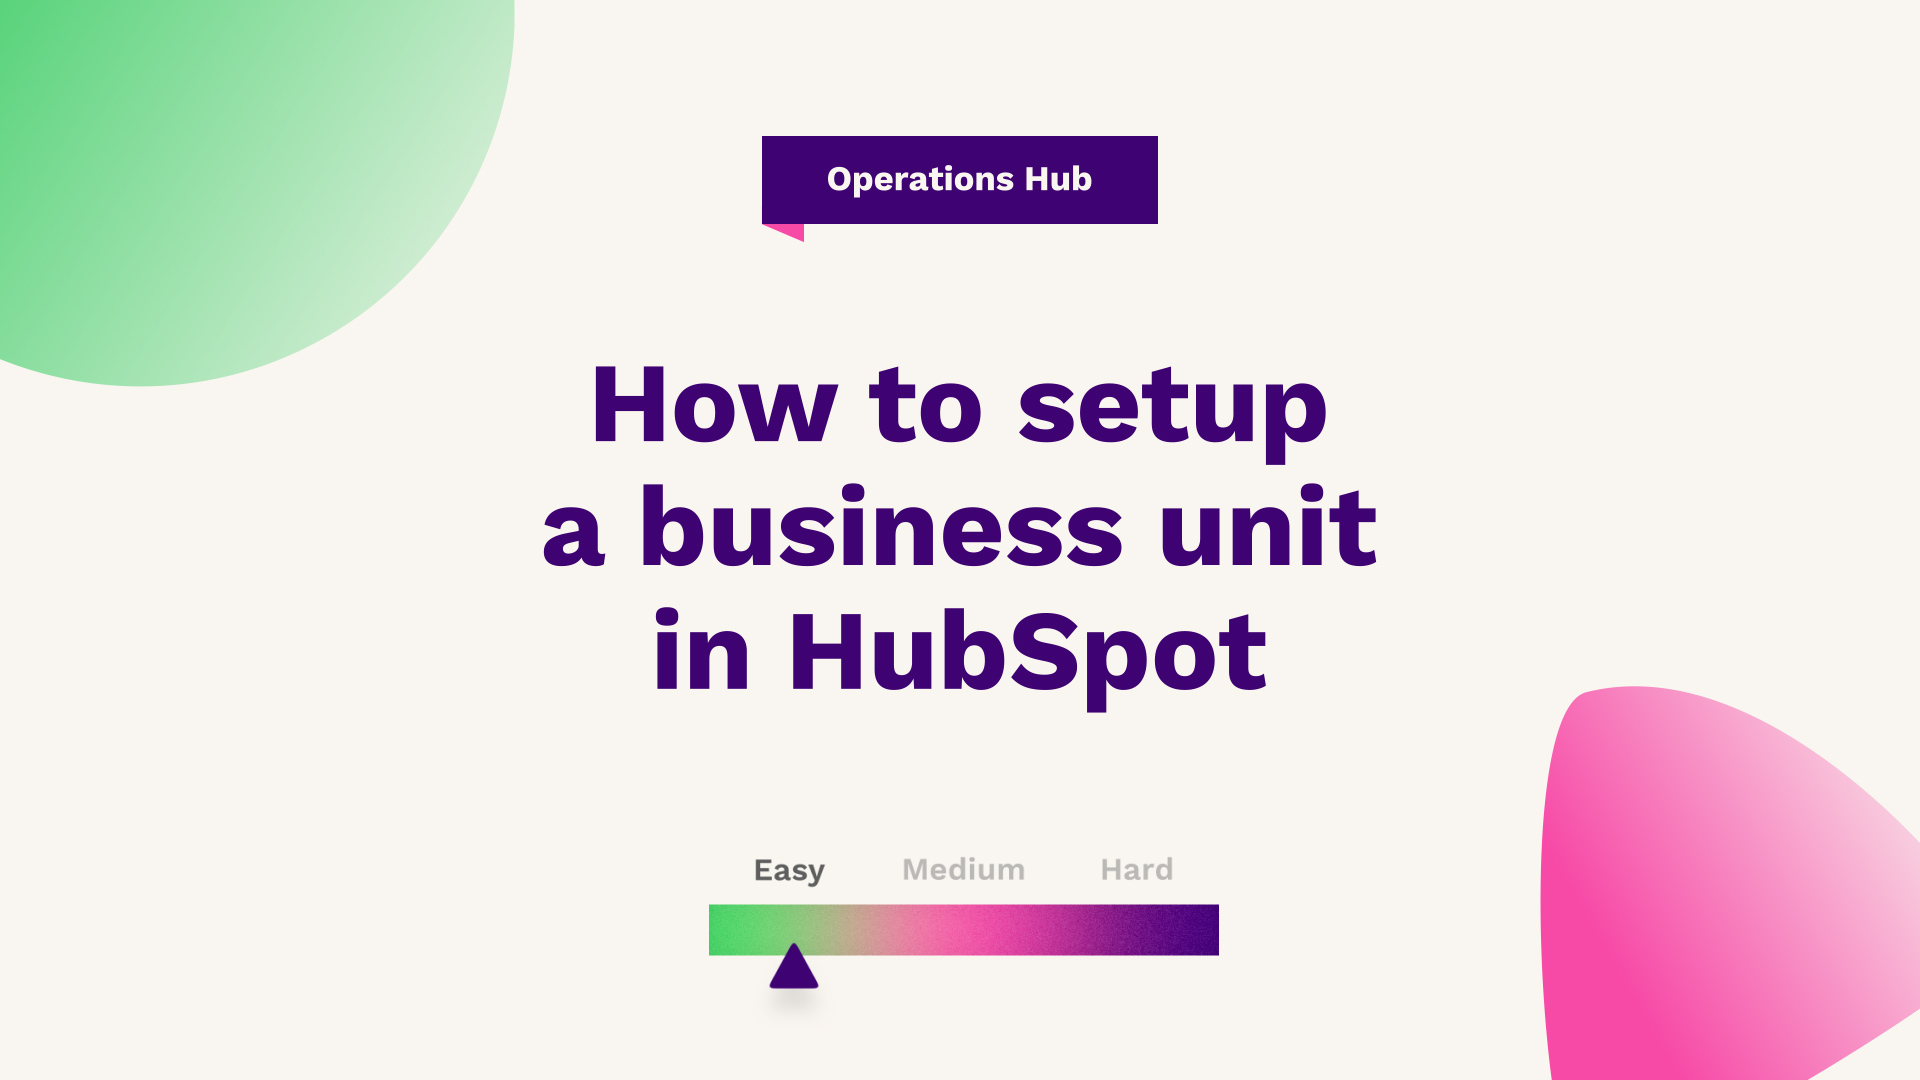 How to set up a business unit in HubSpot